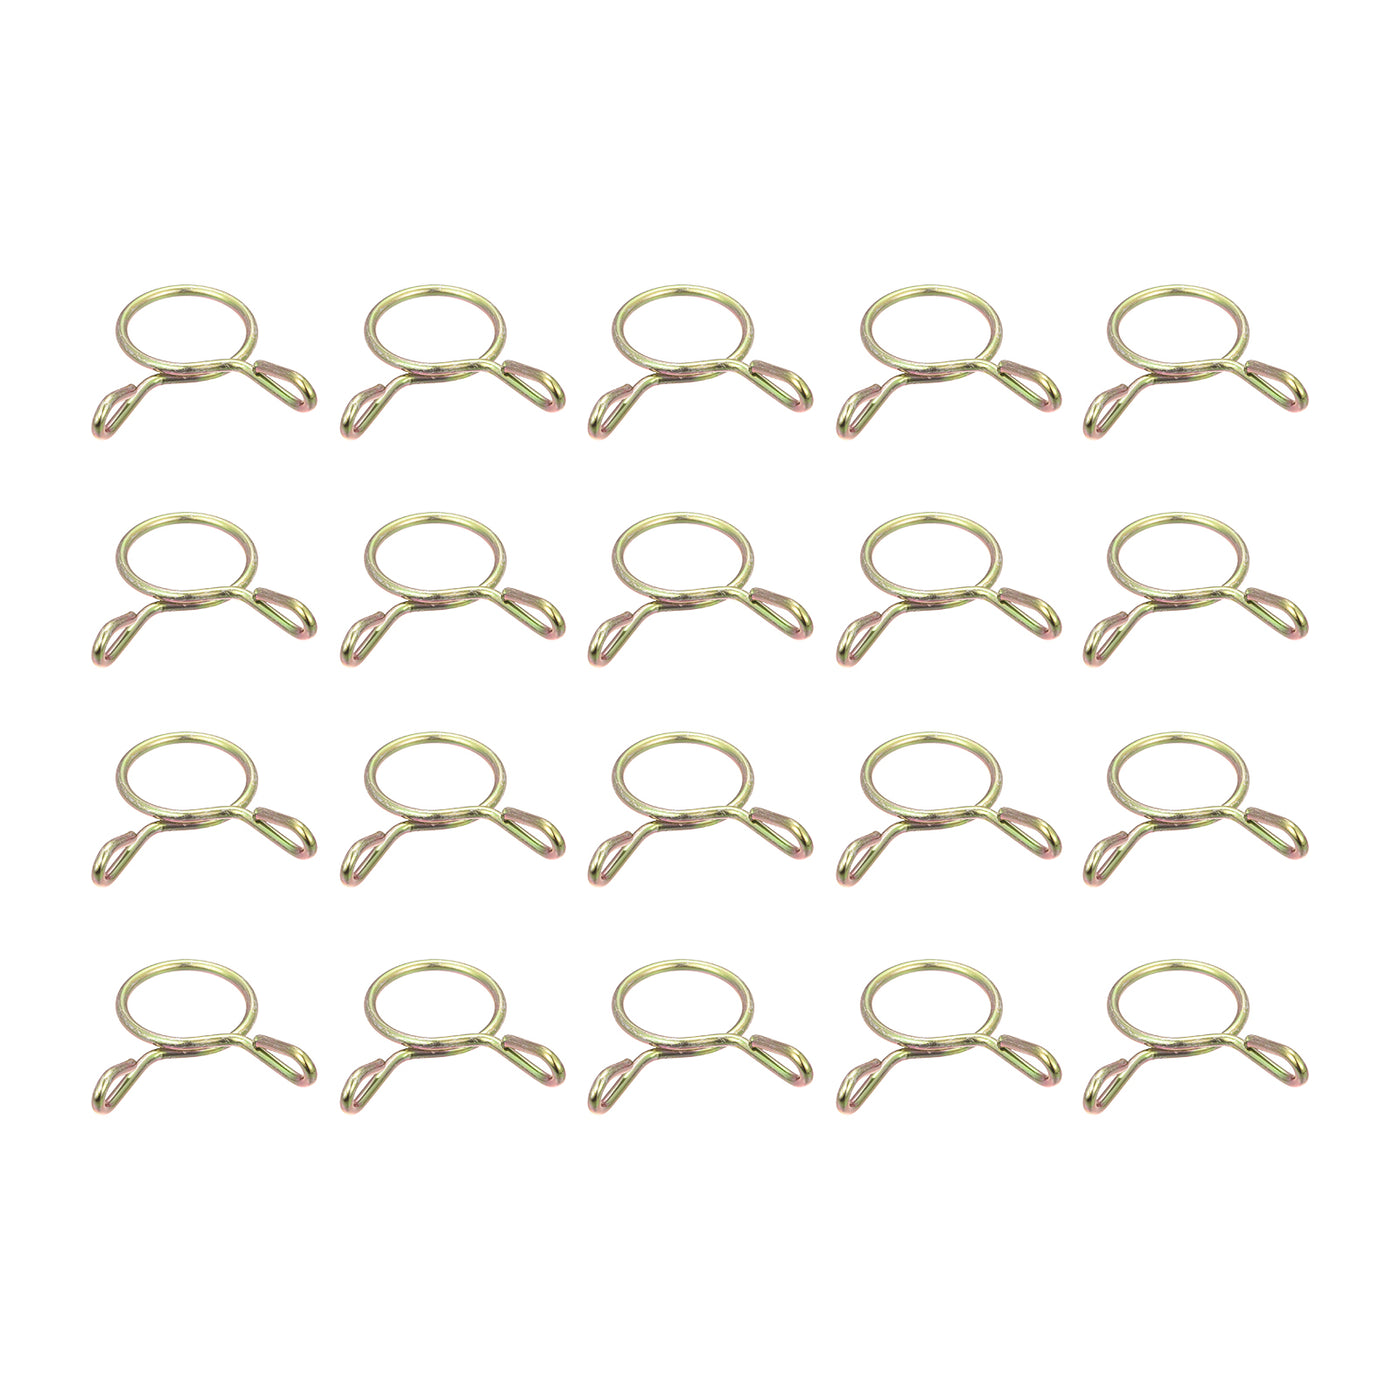 Uxcell Uxcell Fuel Line Hose Clips, 50pcs 19mm 65Mn Steel Tubing Spring Clamps